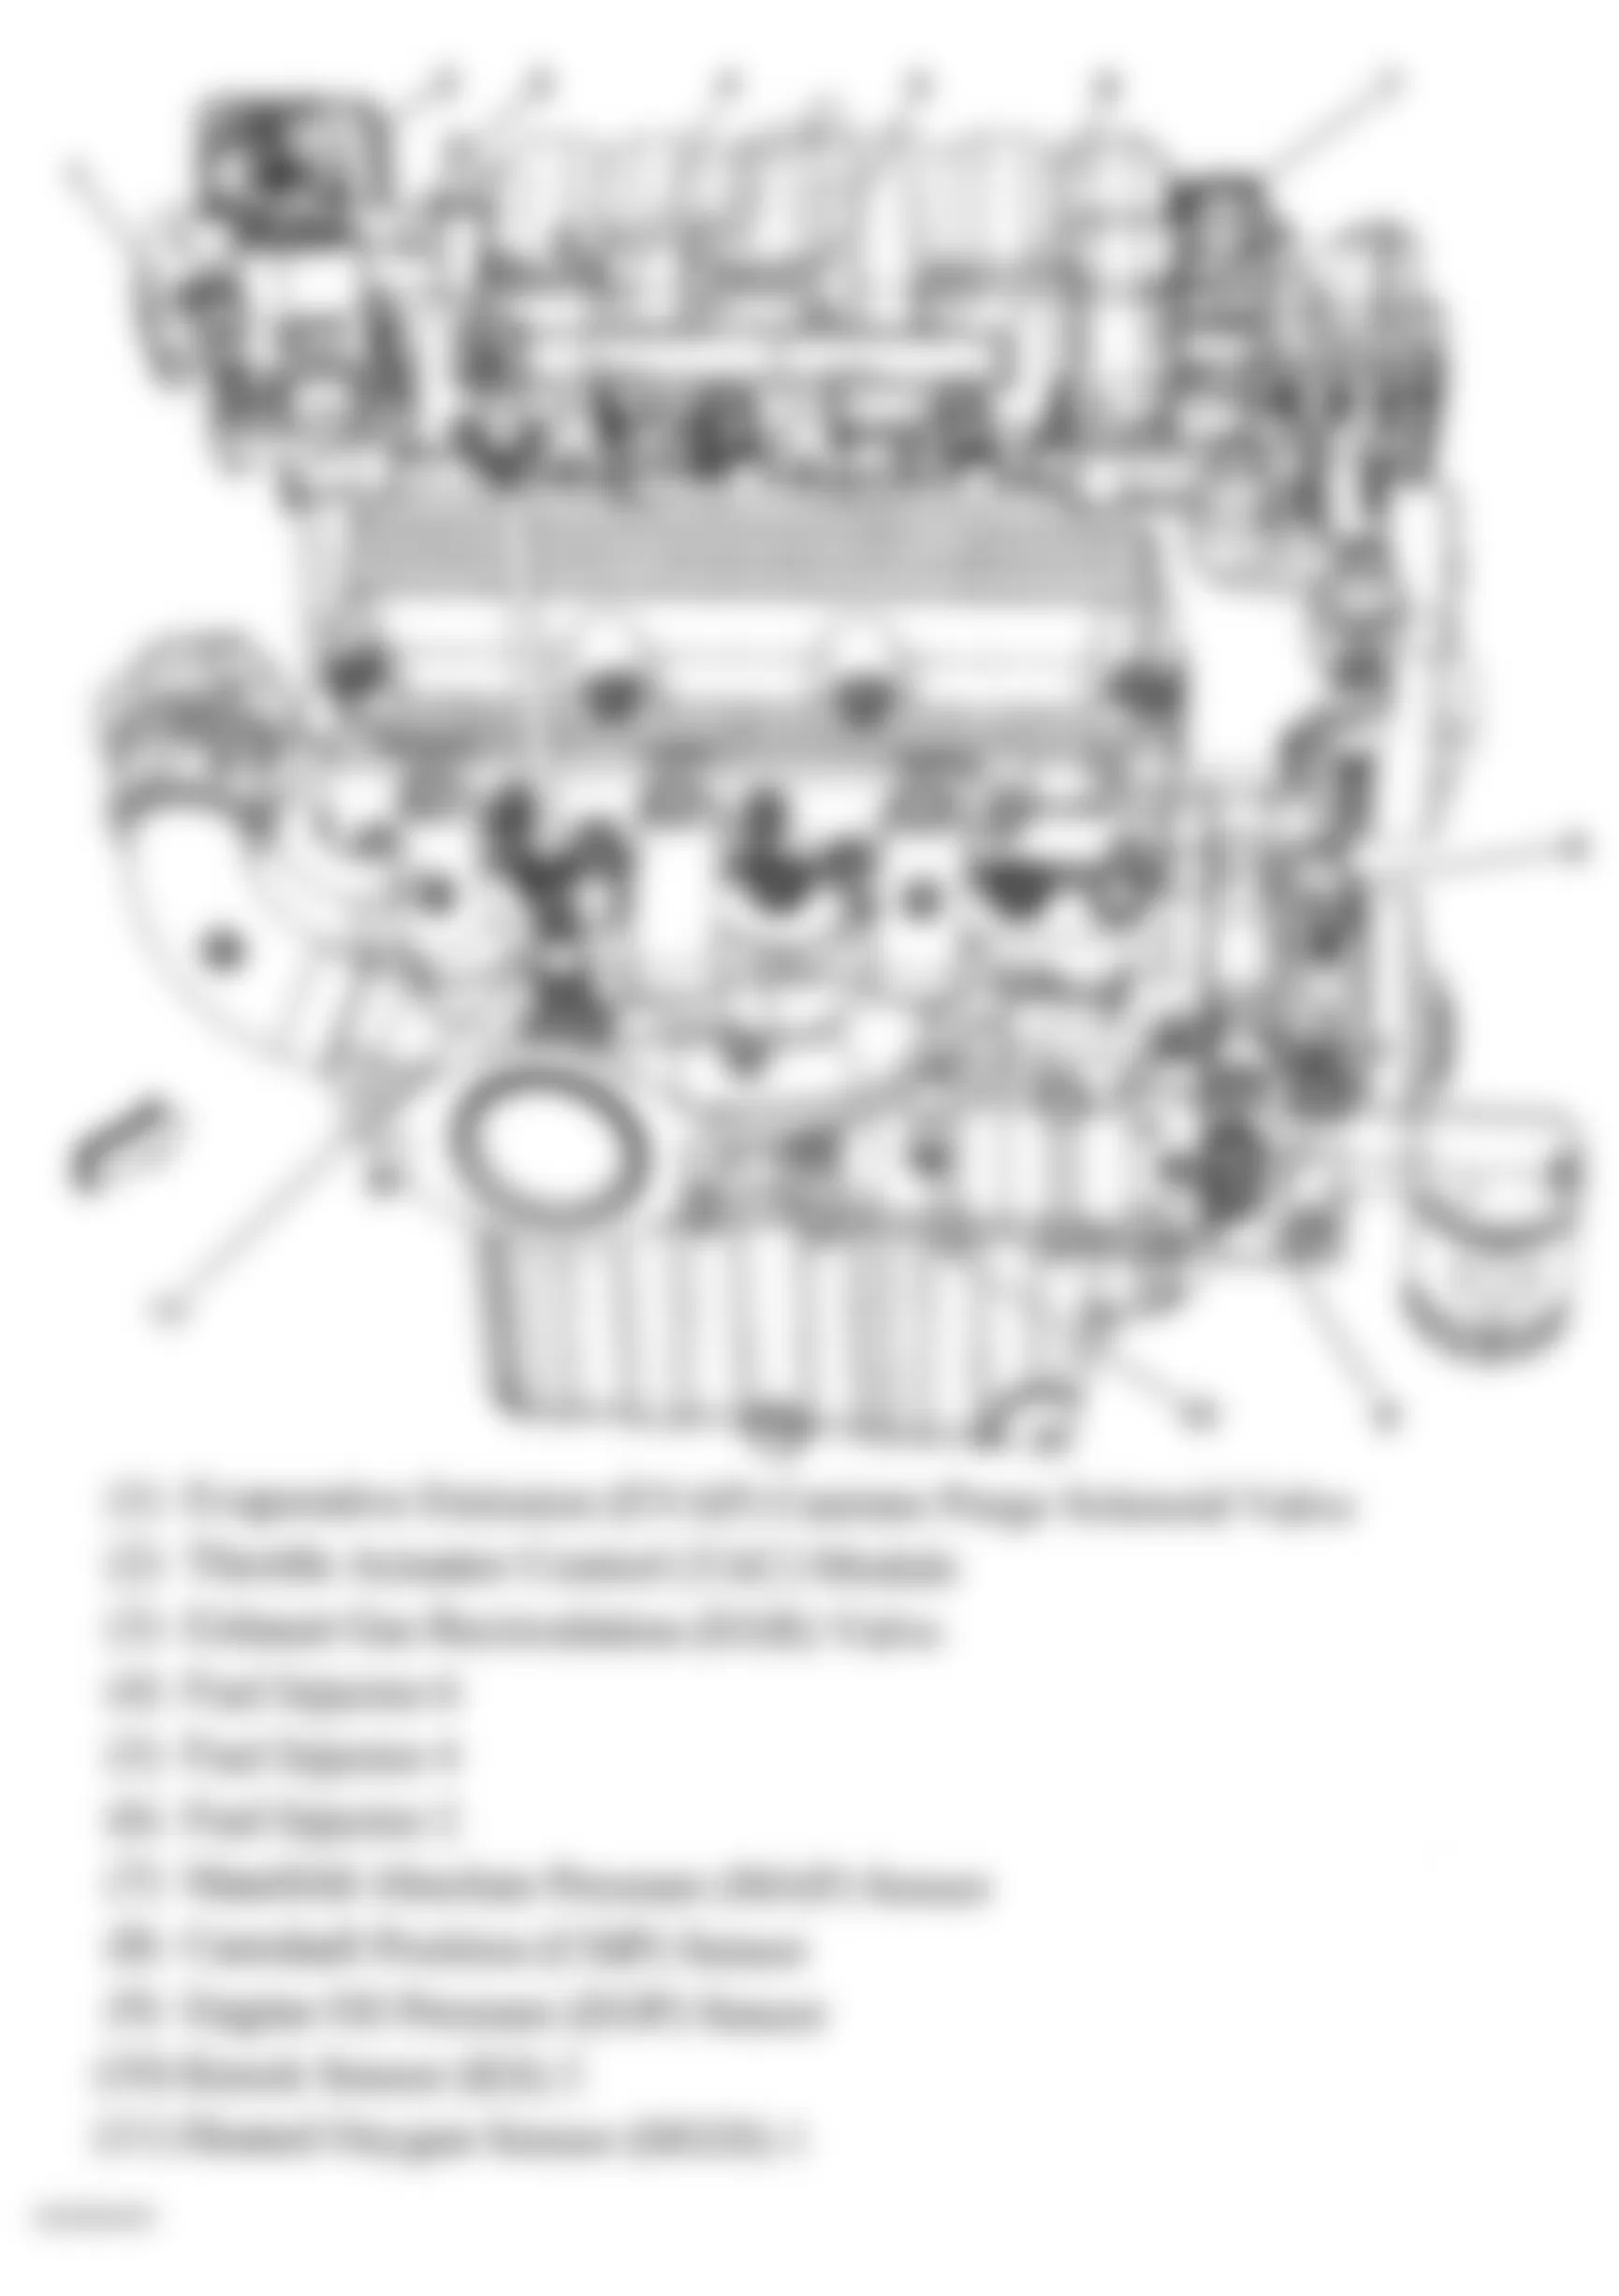 Buick Allure CX 2006 - Component Locations -  Right Side Of Engine (3.8L)